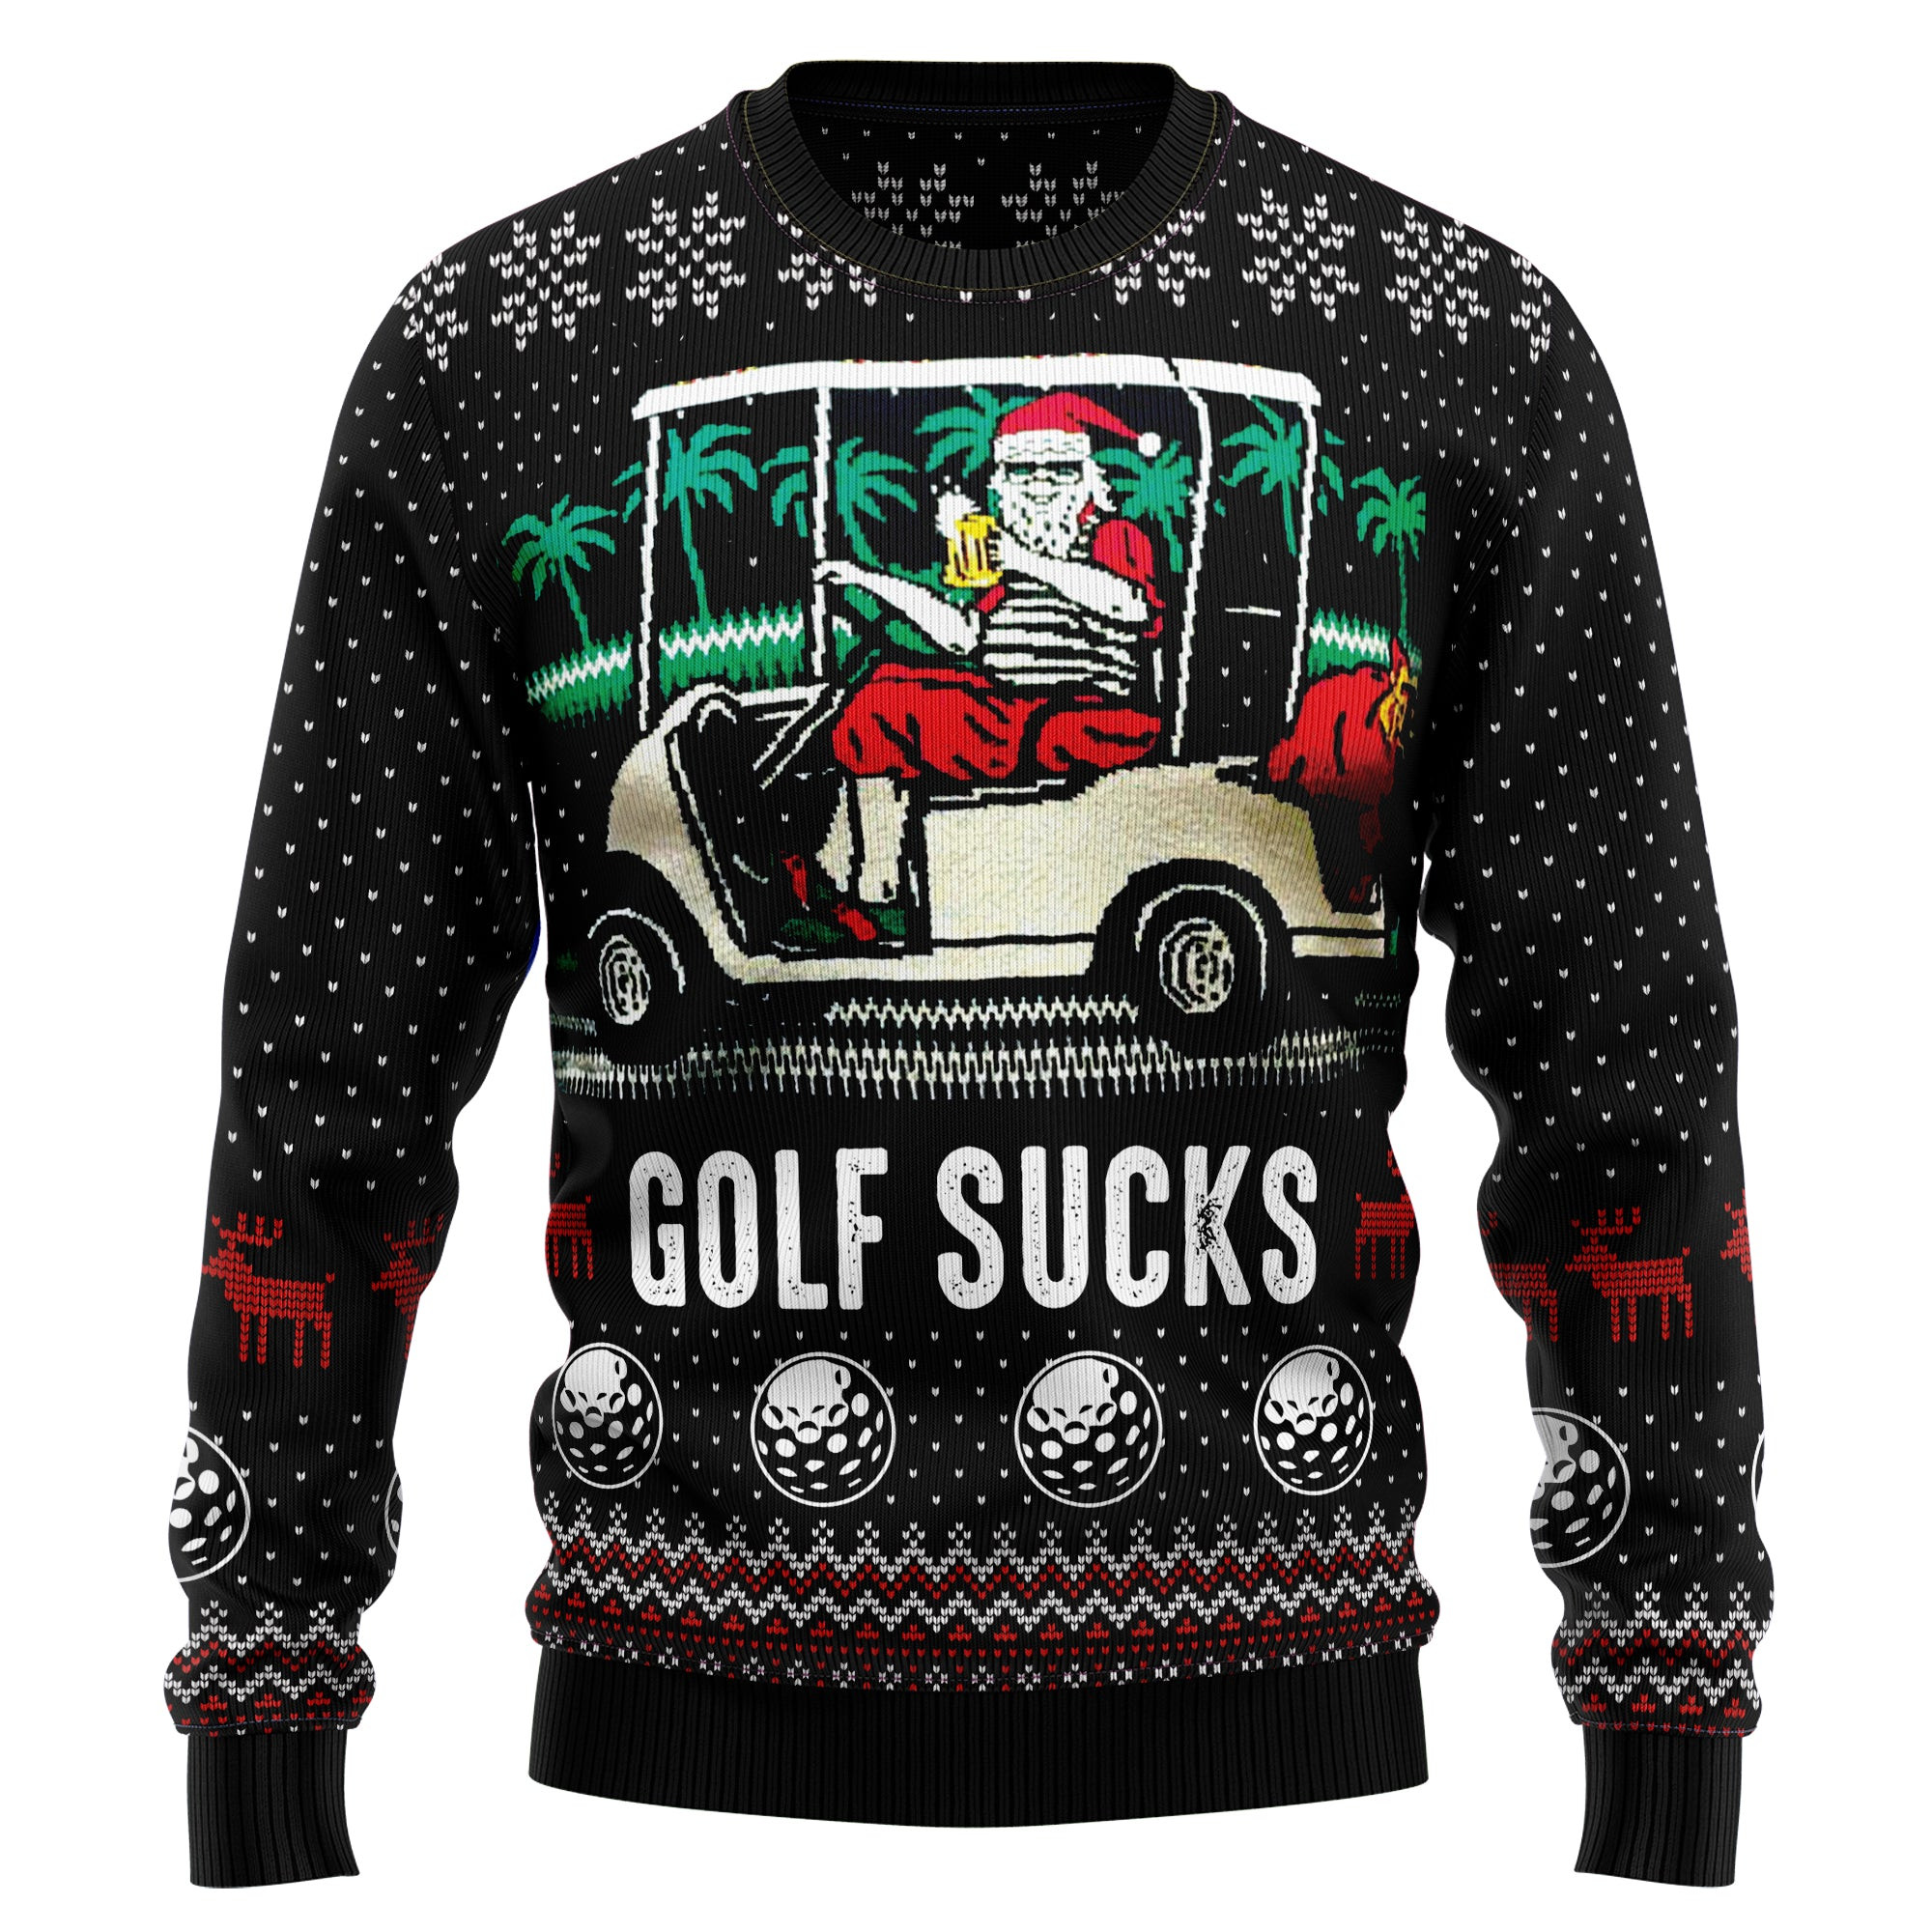 Golf Sucks Ugly Christmas Sweater, Ugly Sweater For Men Women, Holiday Sweater